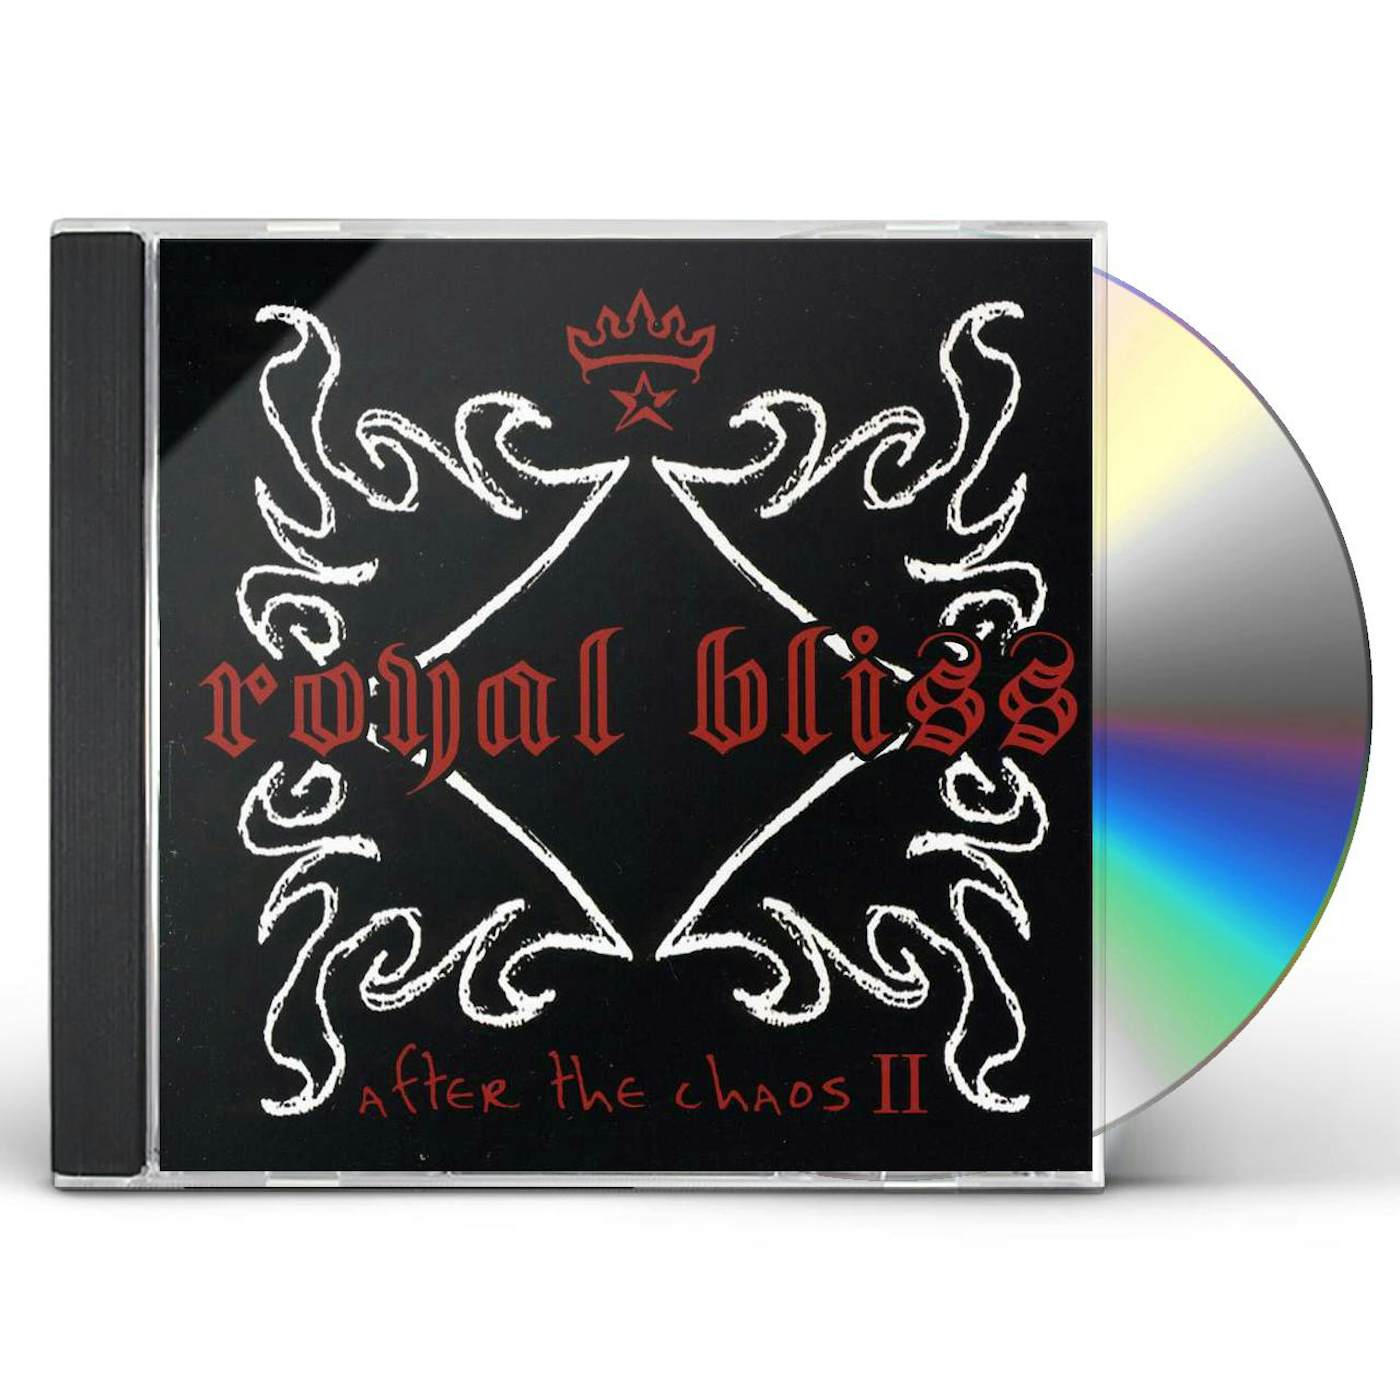 Royal Bliss AFTER THE CHAOS II CD